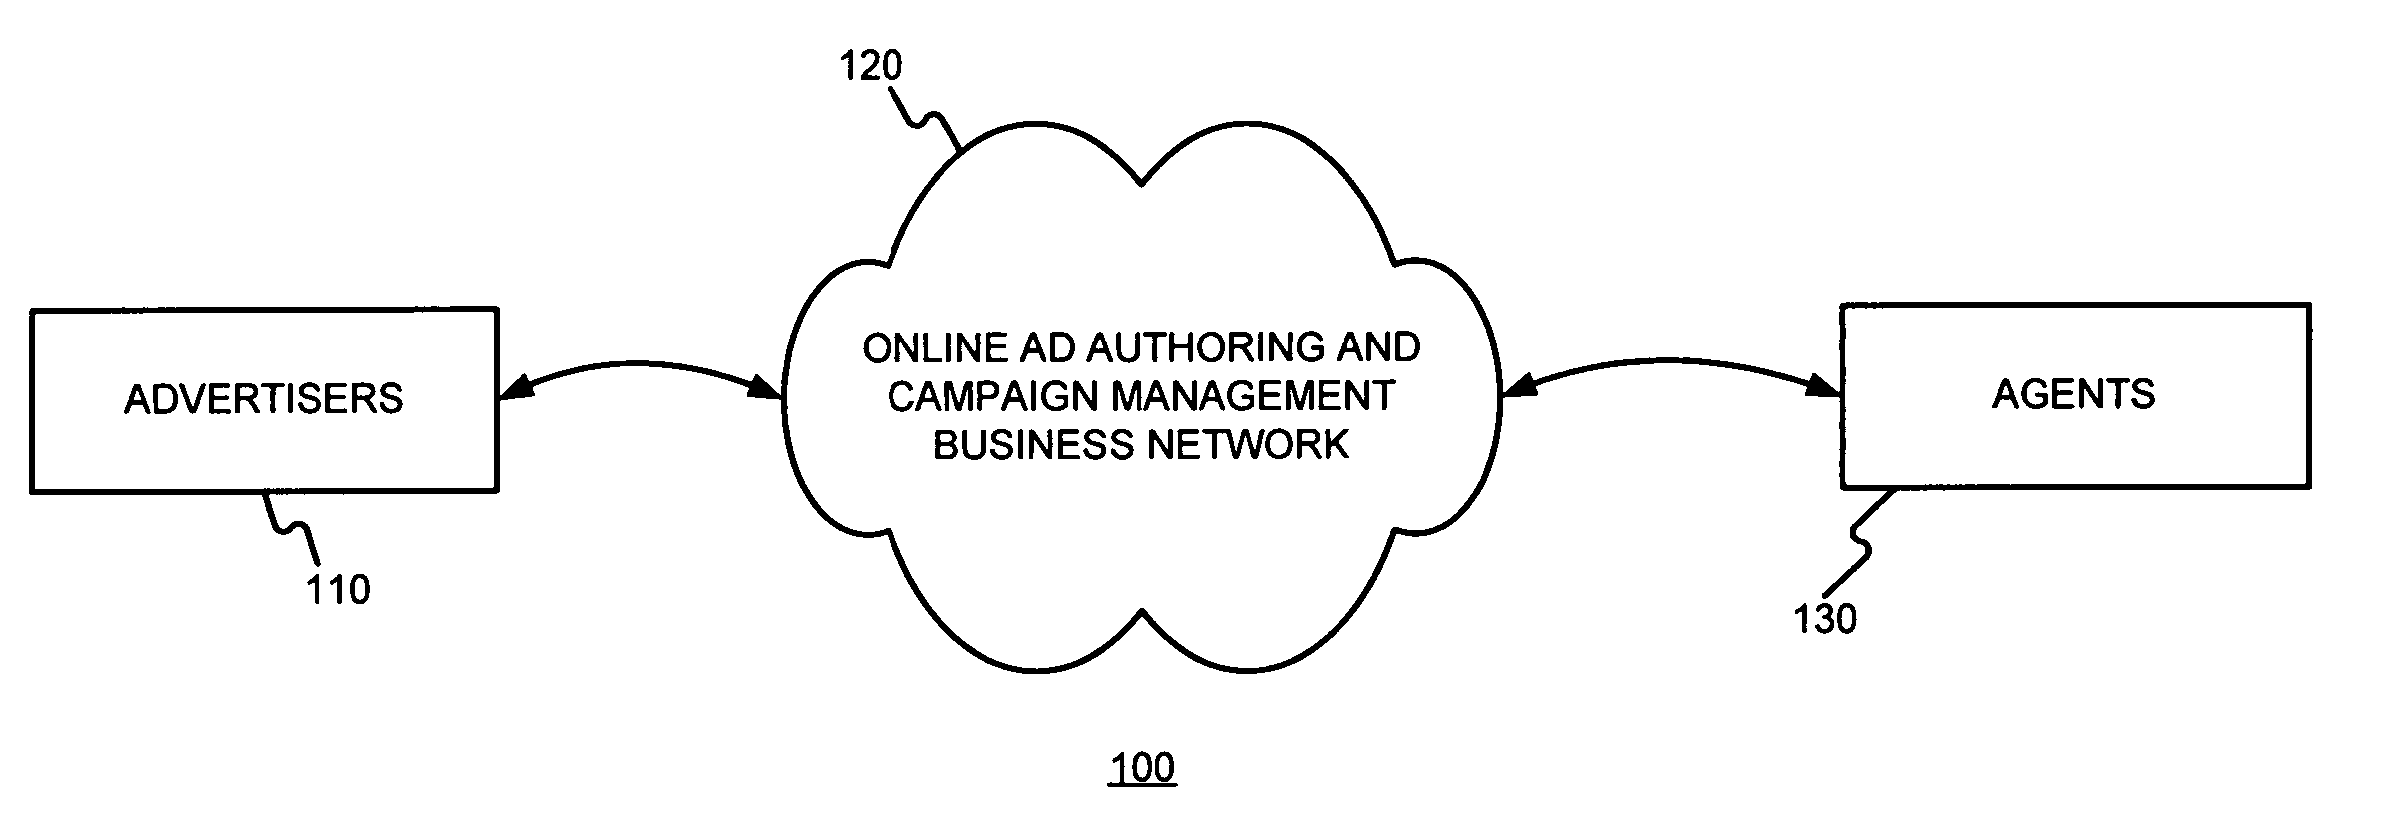 Networking advertisers and agents for ad authoring and/or ad campaign management